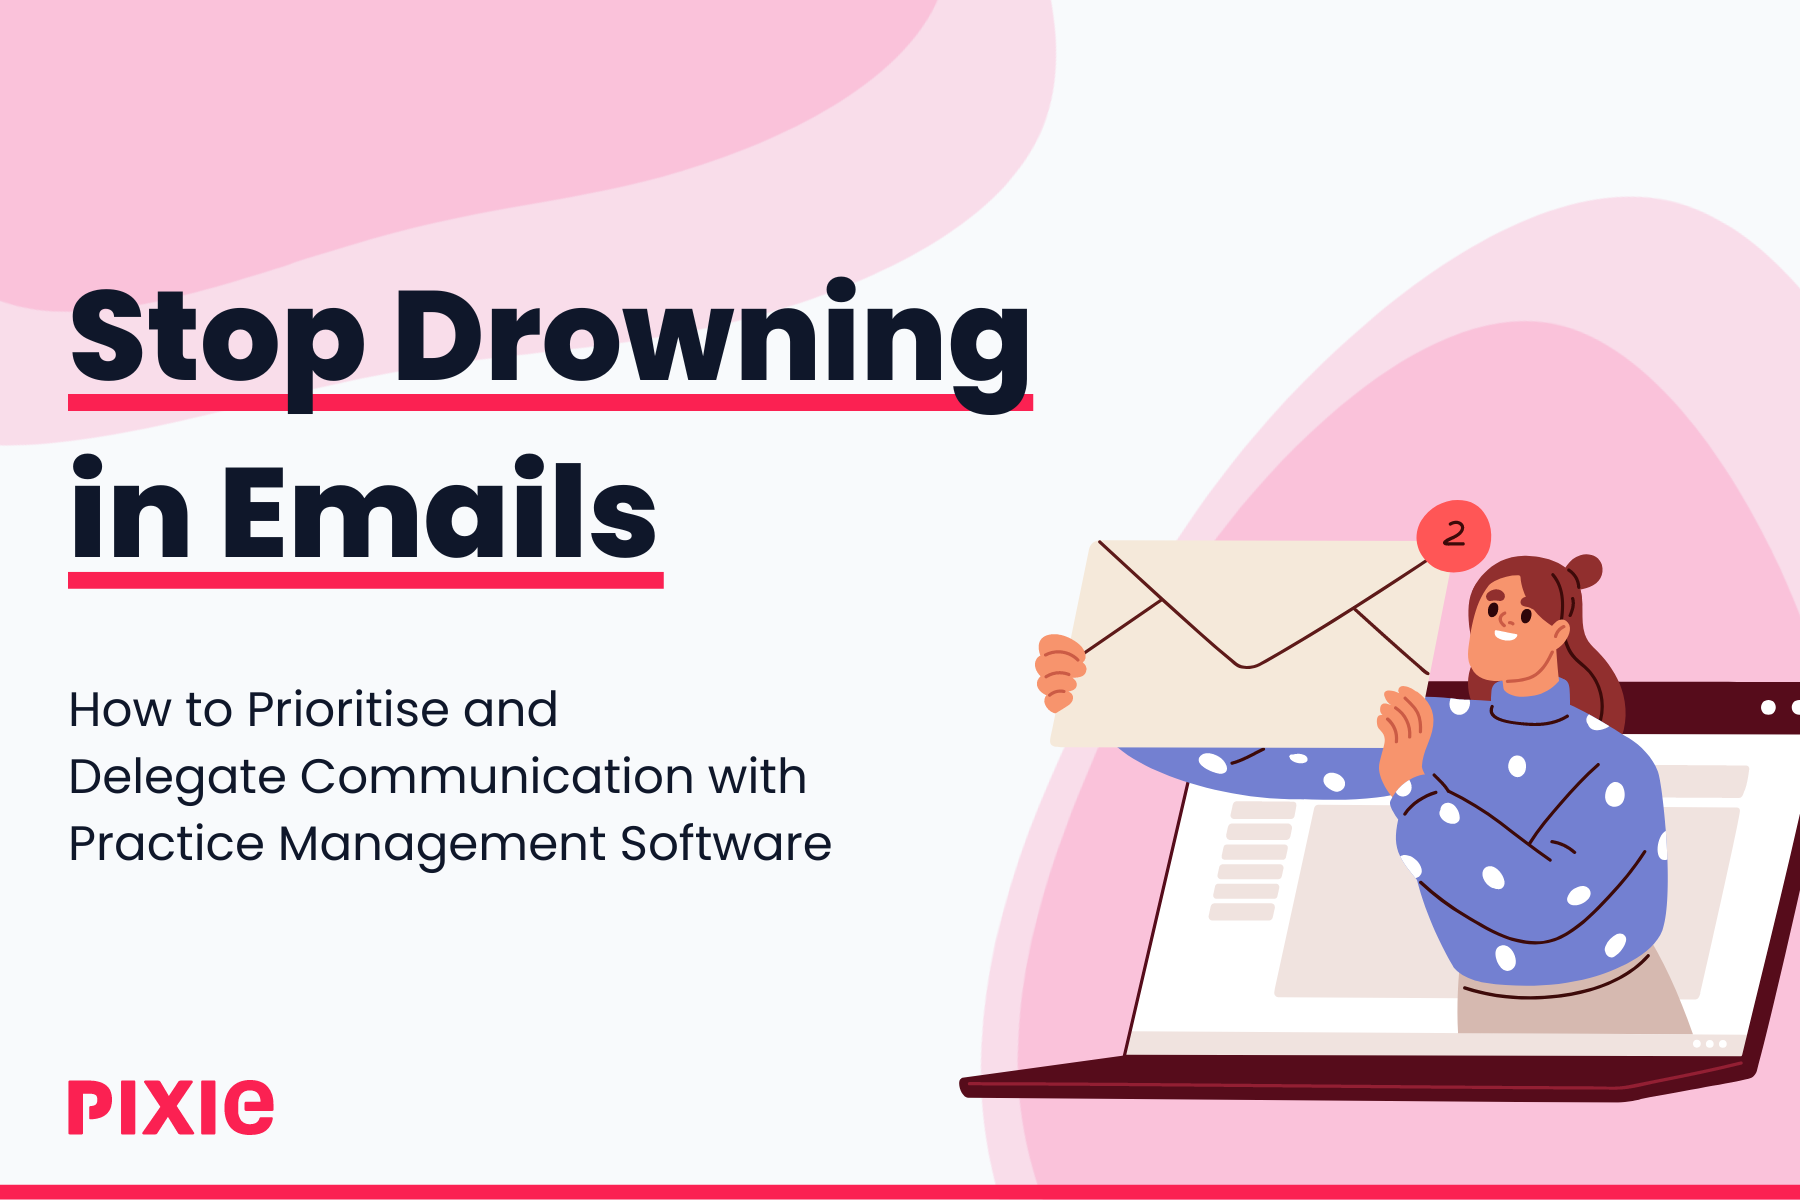 Stop Drowning in Emails: How to Prioritise and Delegate Communication with Practice Management Software